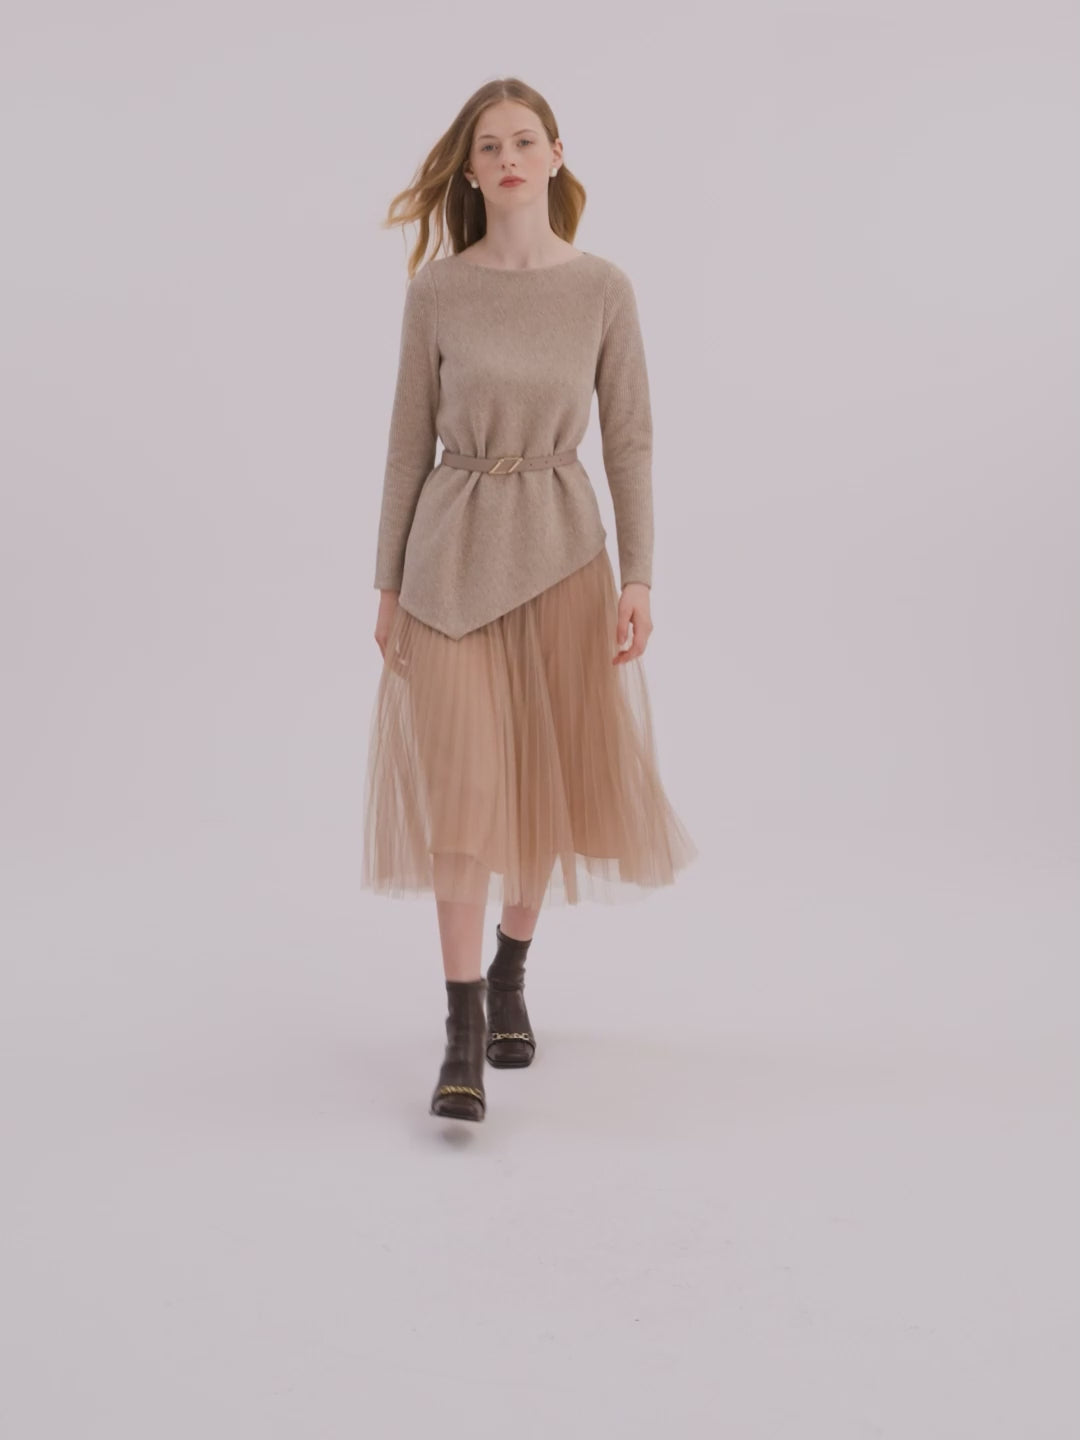 Asymmetrical Hem Top And Tulle Women Skirt With Belt Two-Piece Set